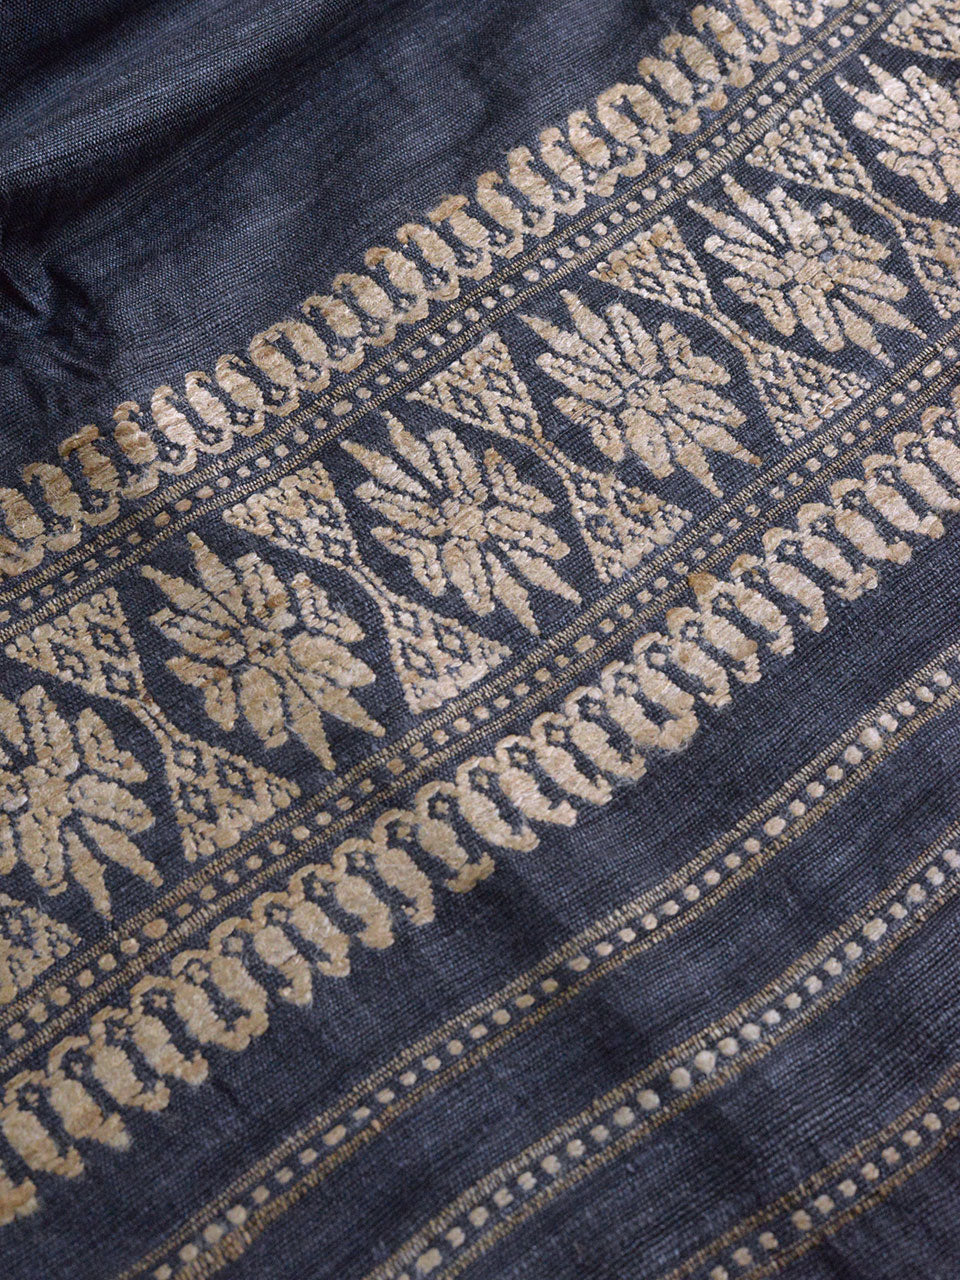 Orang - Patterned Eri Silk Stole Charcoal